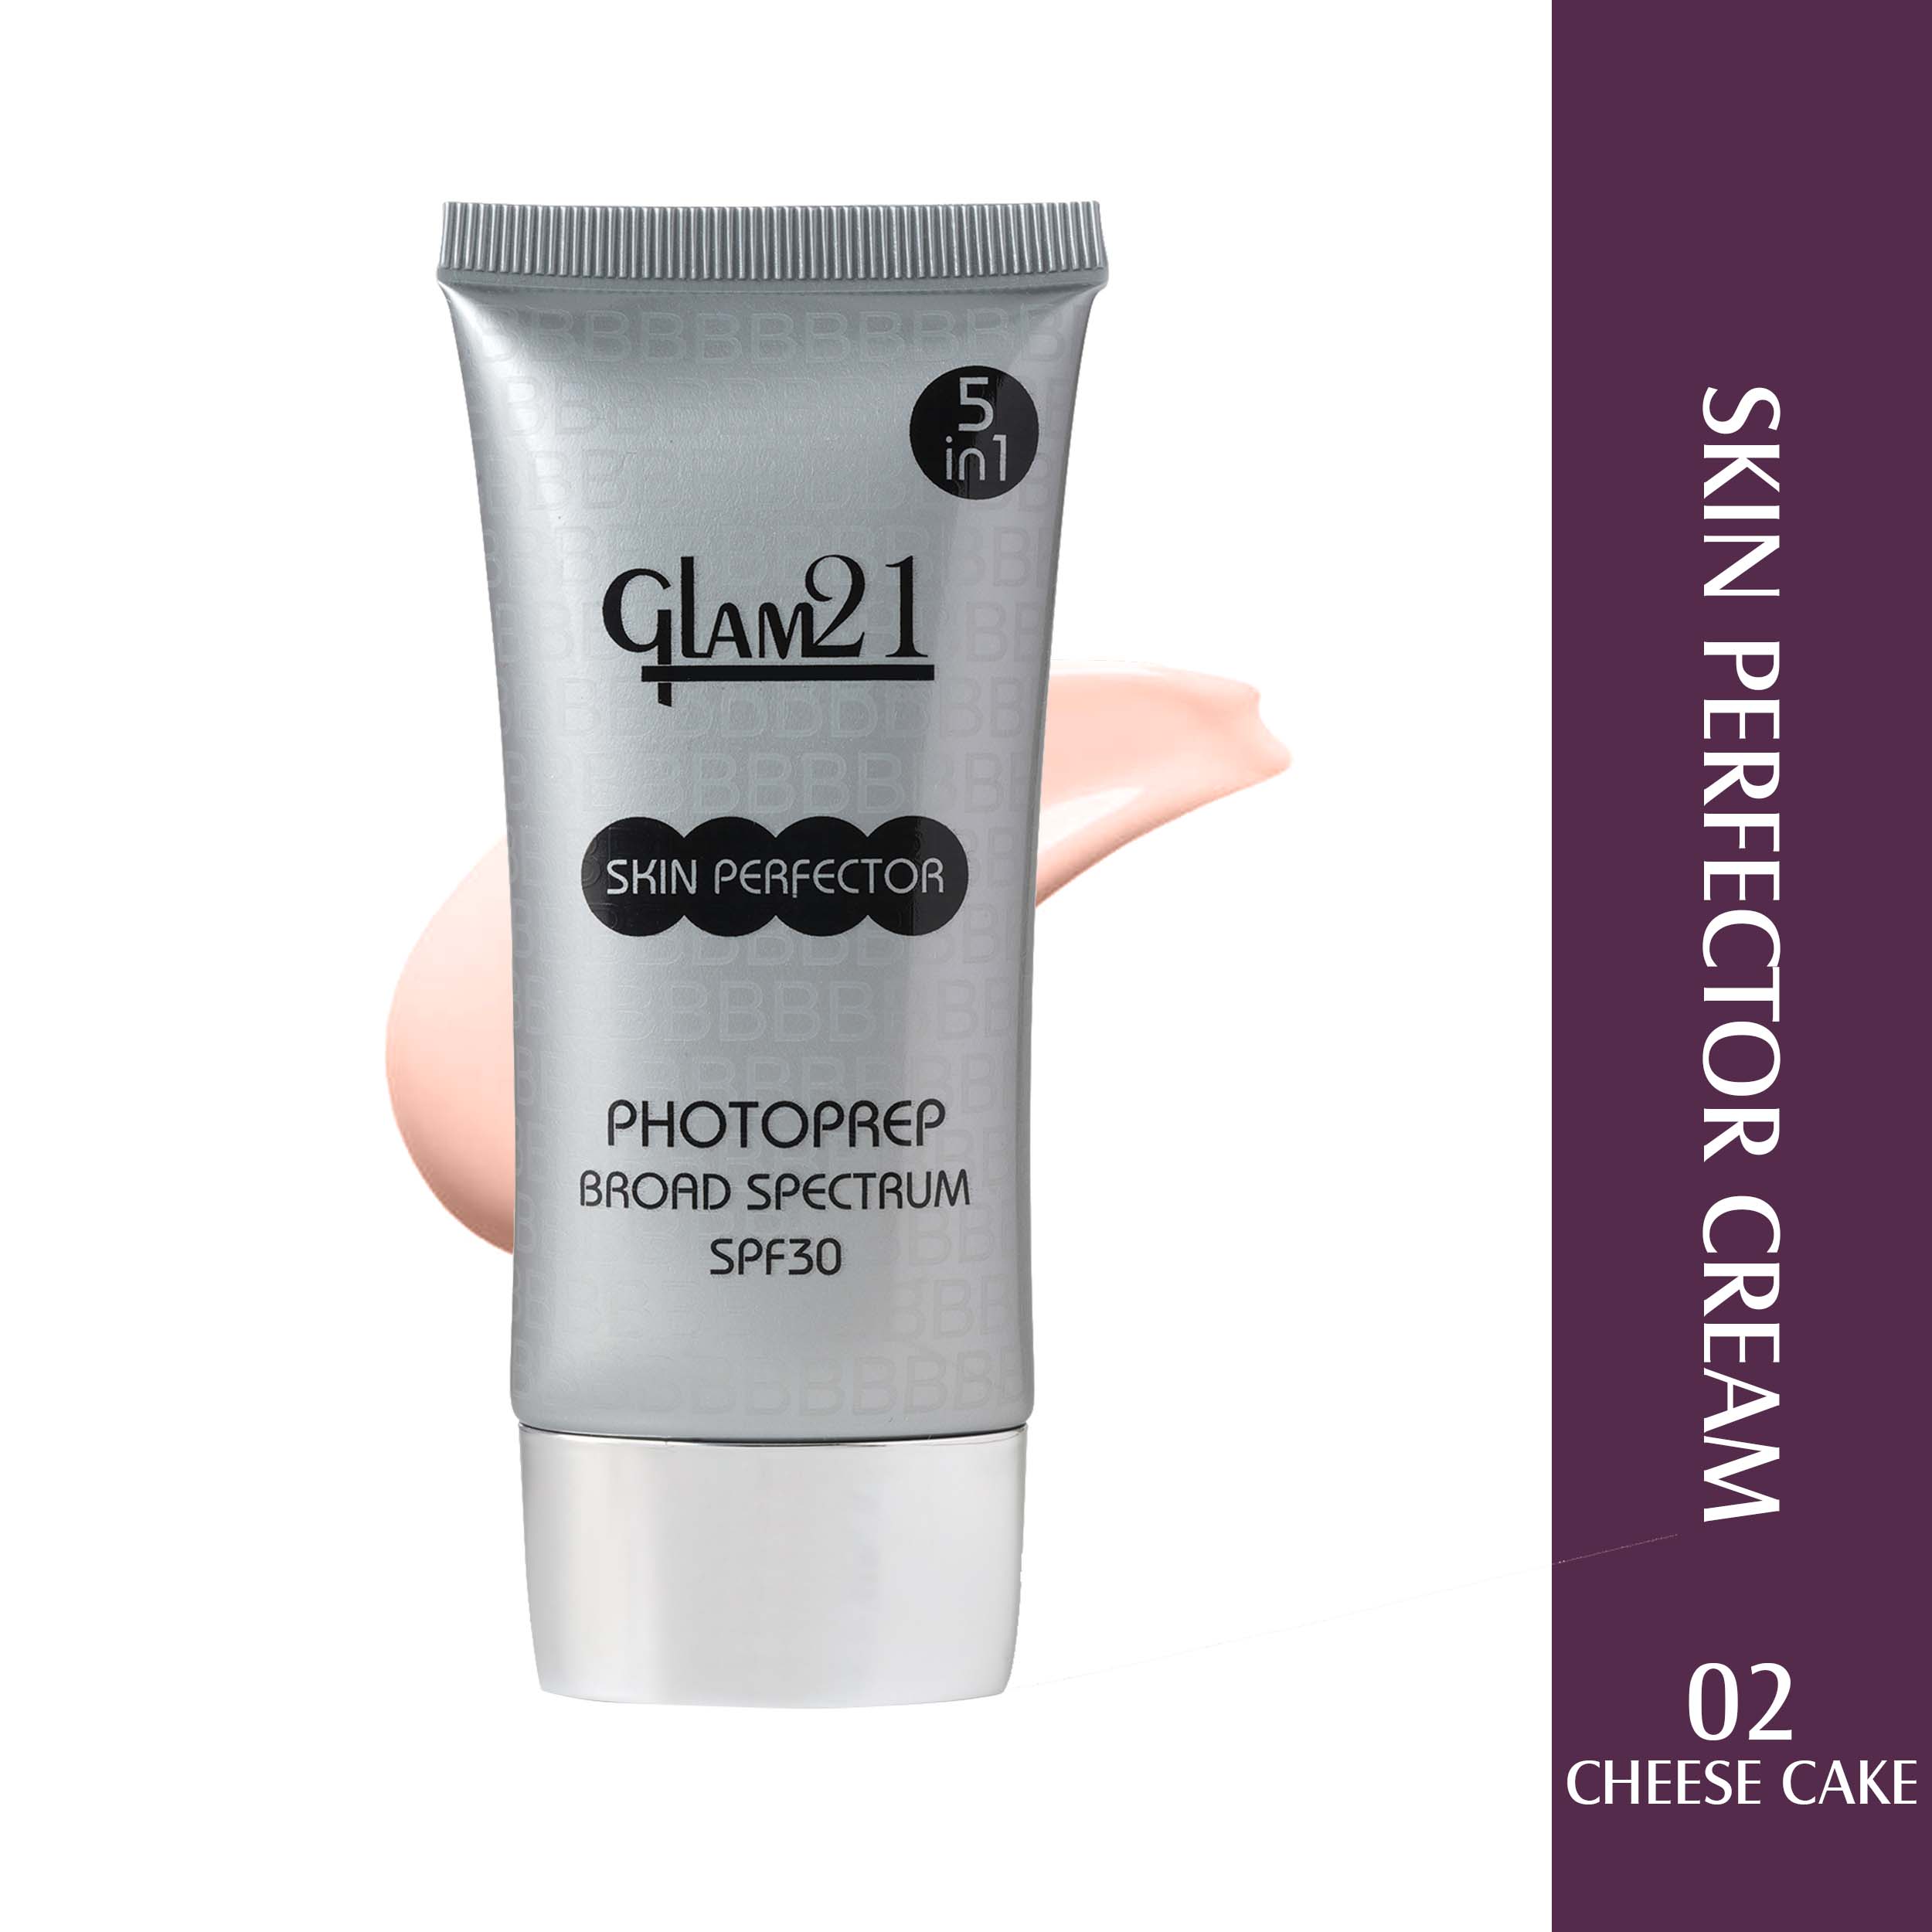 Glam21 Skin Perfector Cream with SPF30 UV Protection with Lightweight Satin Formulation Foundation, 50g (CHEESE CAKE-02)